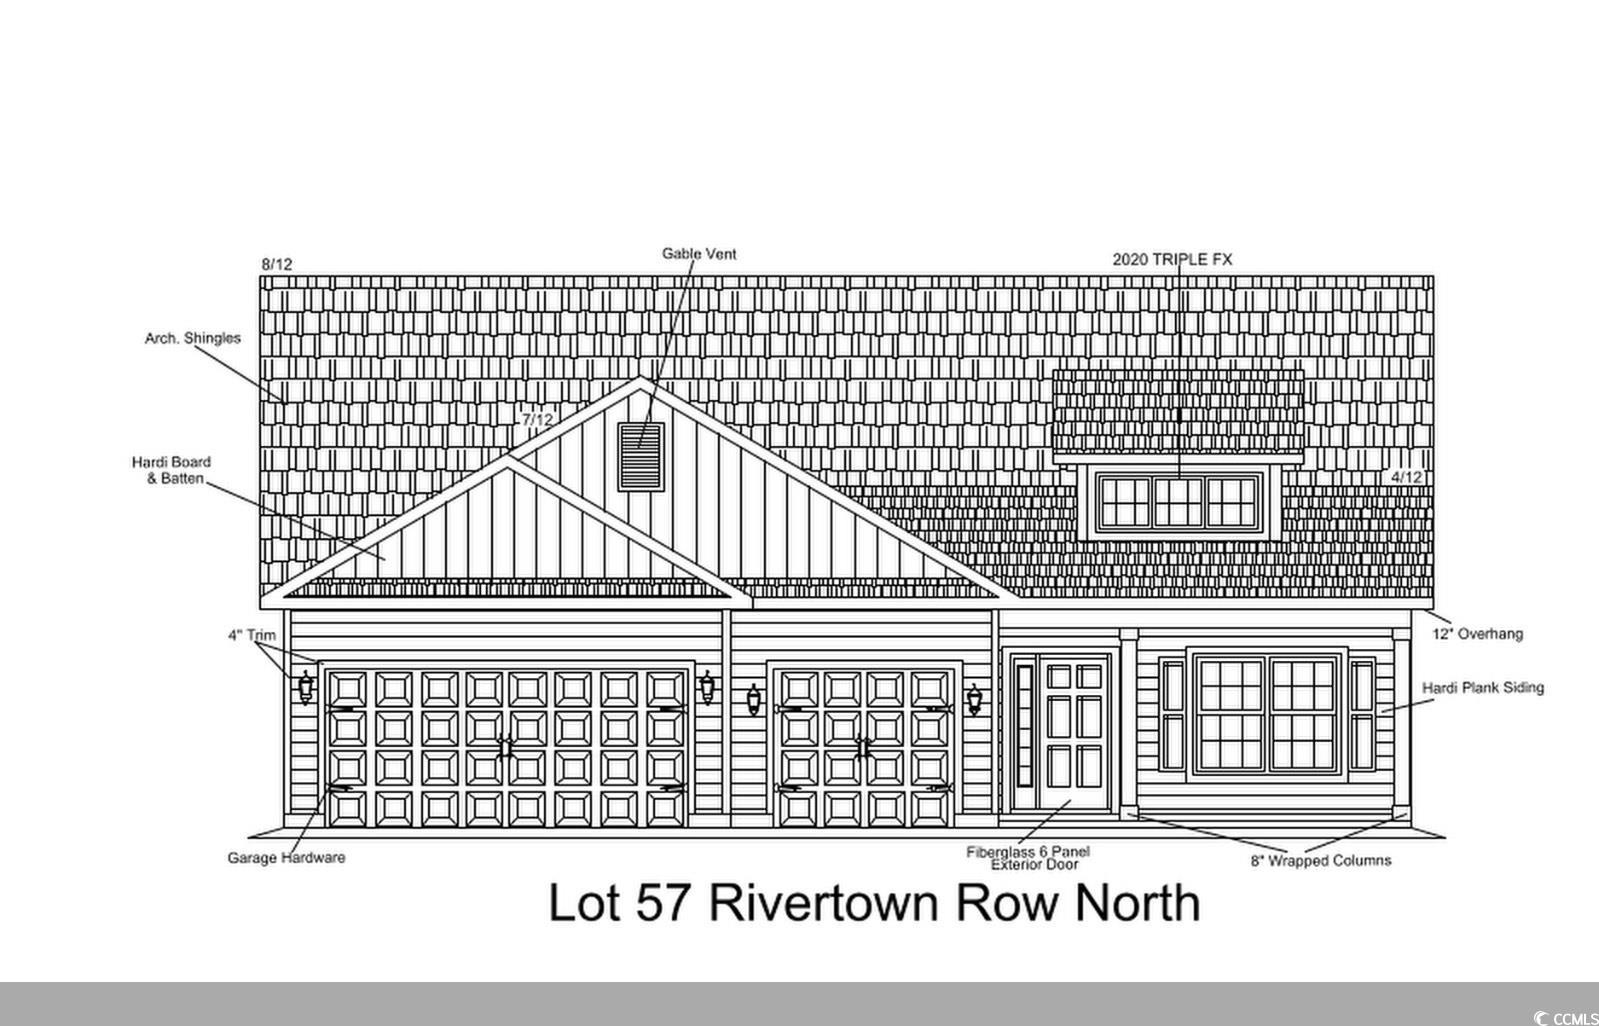 welcome to rivertown row north, the most anticipated new development in the heart of conway. all new homes in this neighborhood will be constructed with hardie plank exterior siding. enjoy the comfort of natural gas heat, cooking & tankless hot water in this 1876 sq ft buxton model with 3 car garage, that sits on a lakefront lot. this 3 bedroom, 3 bath split floor plan has a large rear master suite with access to the laundry room from the master closet, vaulted great room ceilings, granite kitchen counter tops, and a kitchen bar w/ seating. the waterproof laminate plank flooring extends throughout the kitchen baths  and living areas. the third bedroom is an upstairs suite with its own full bath. there is also a 3 car painted and trimmed garage w/ drop down attic access, laundry room pantry,  covered front porch, and a covered rear porch with an additional concrete patio that doubles your outdoor entertainment space. all homes in rivertown row north feature wider than average lots, open floor plans, 9' ceilings, painted garage interiors, gutters, fully cased windows, gaf high performance architectural shingles, 12" roof overhangs, aristokraft stone gray painted birch shaker cabinets, rinnai tankless water heater, frigidaire stainless appliances, and many other upgraded architectural details. the neighborhood features sidewalks, street lighting and a community pool with pavilion. building lifestyles for over 35 years, we remain the premier homebuilder of new residential communities and custom homes in the grand strand and surrounding areas. we are three-time winners of the best home builder award from wmbf news best of the grand strand. in 2023, we were also voted best residential real estate developer in the myrtle beach herald reader’s choice awards. we began and remain in the grand strand, and we want you to experience the local pride we build today and every day in horry and georgetown counties. all pics are not from actual home. pics are from a similar floor plan. actual colors, feature and upgrades will be different.